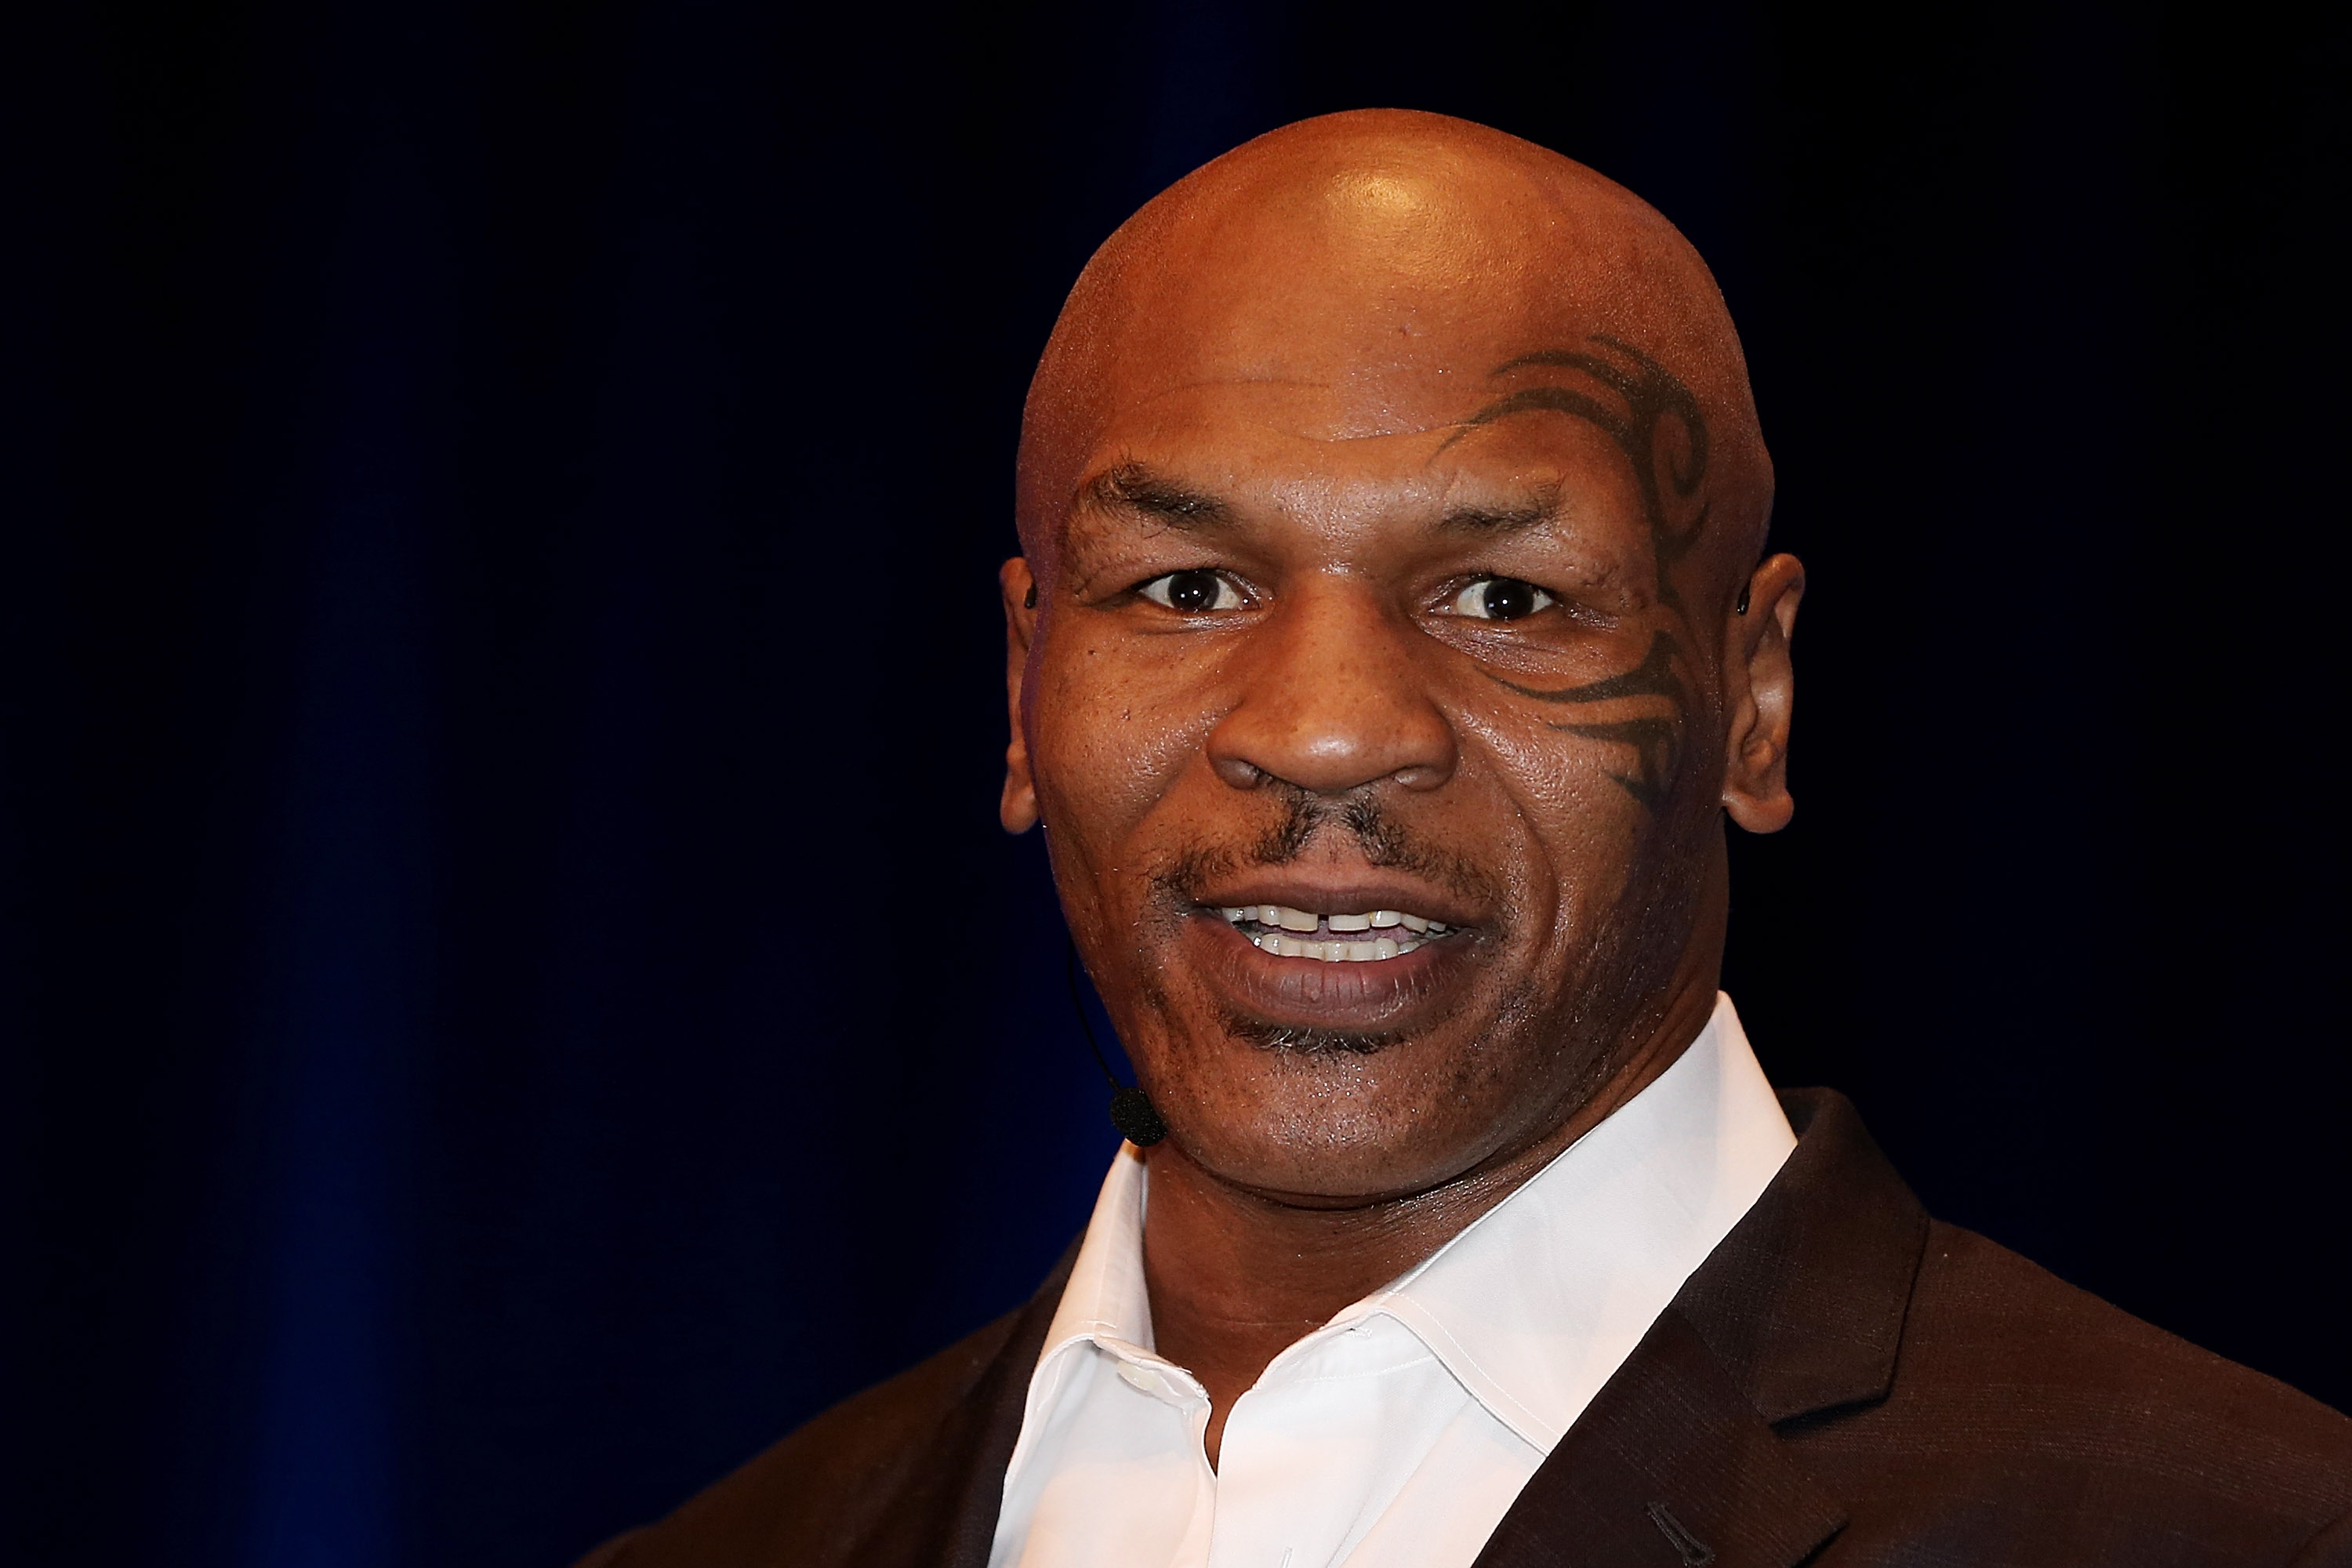 Mike Tyson Says Michael Jackson Was a 'Player,' Feeble Demeanor Was an Act